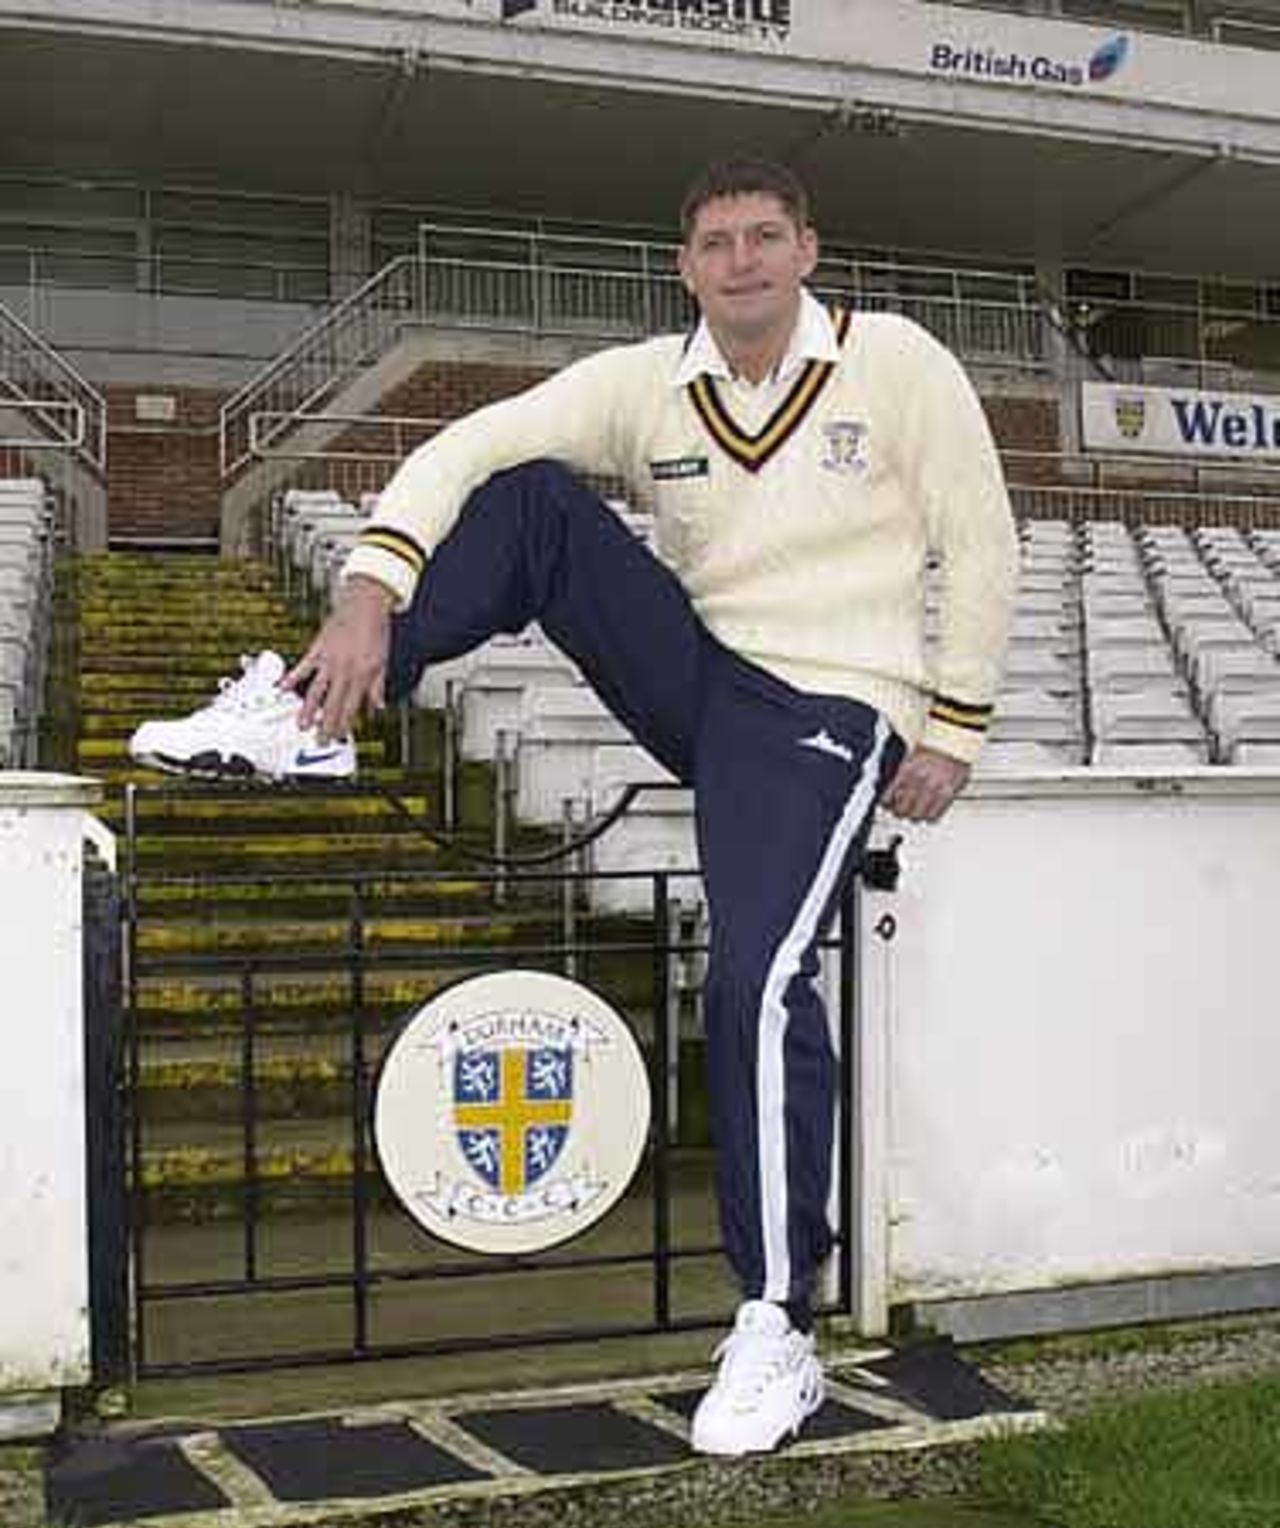 On the day he signed his coaches contract with Durham